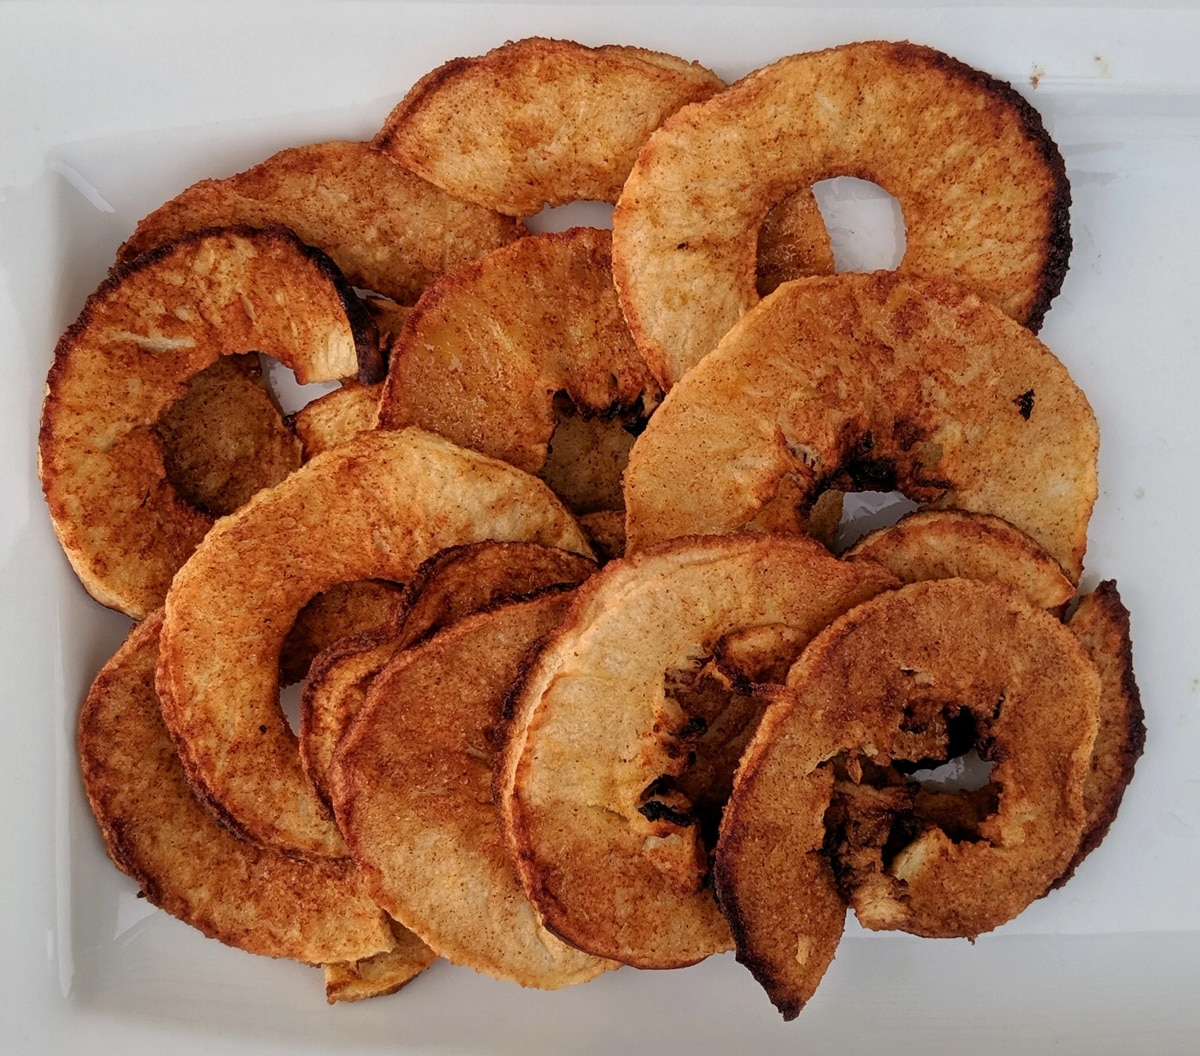 Low-calorie homemade apple chips